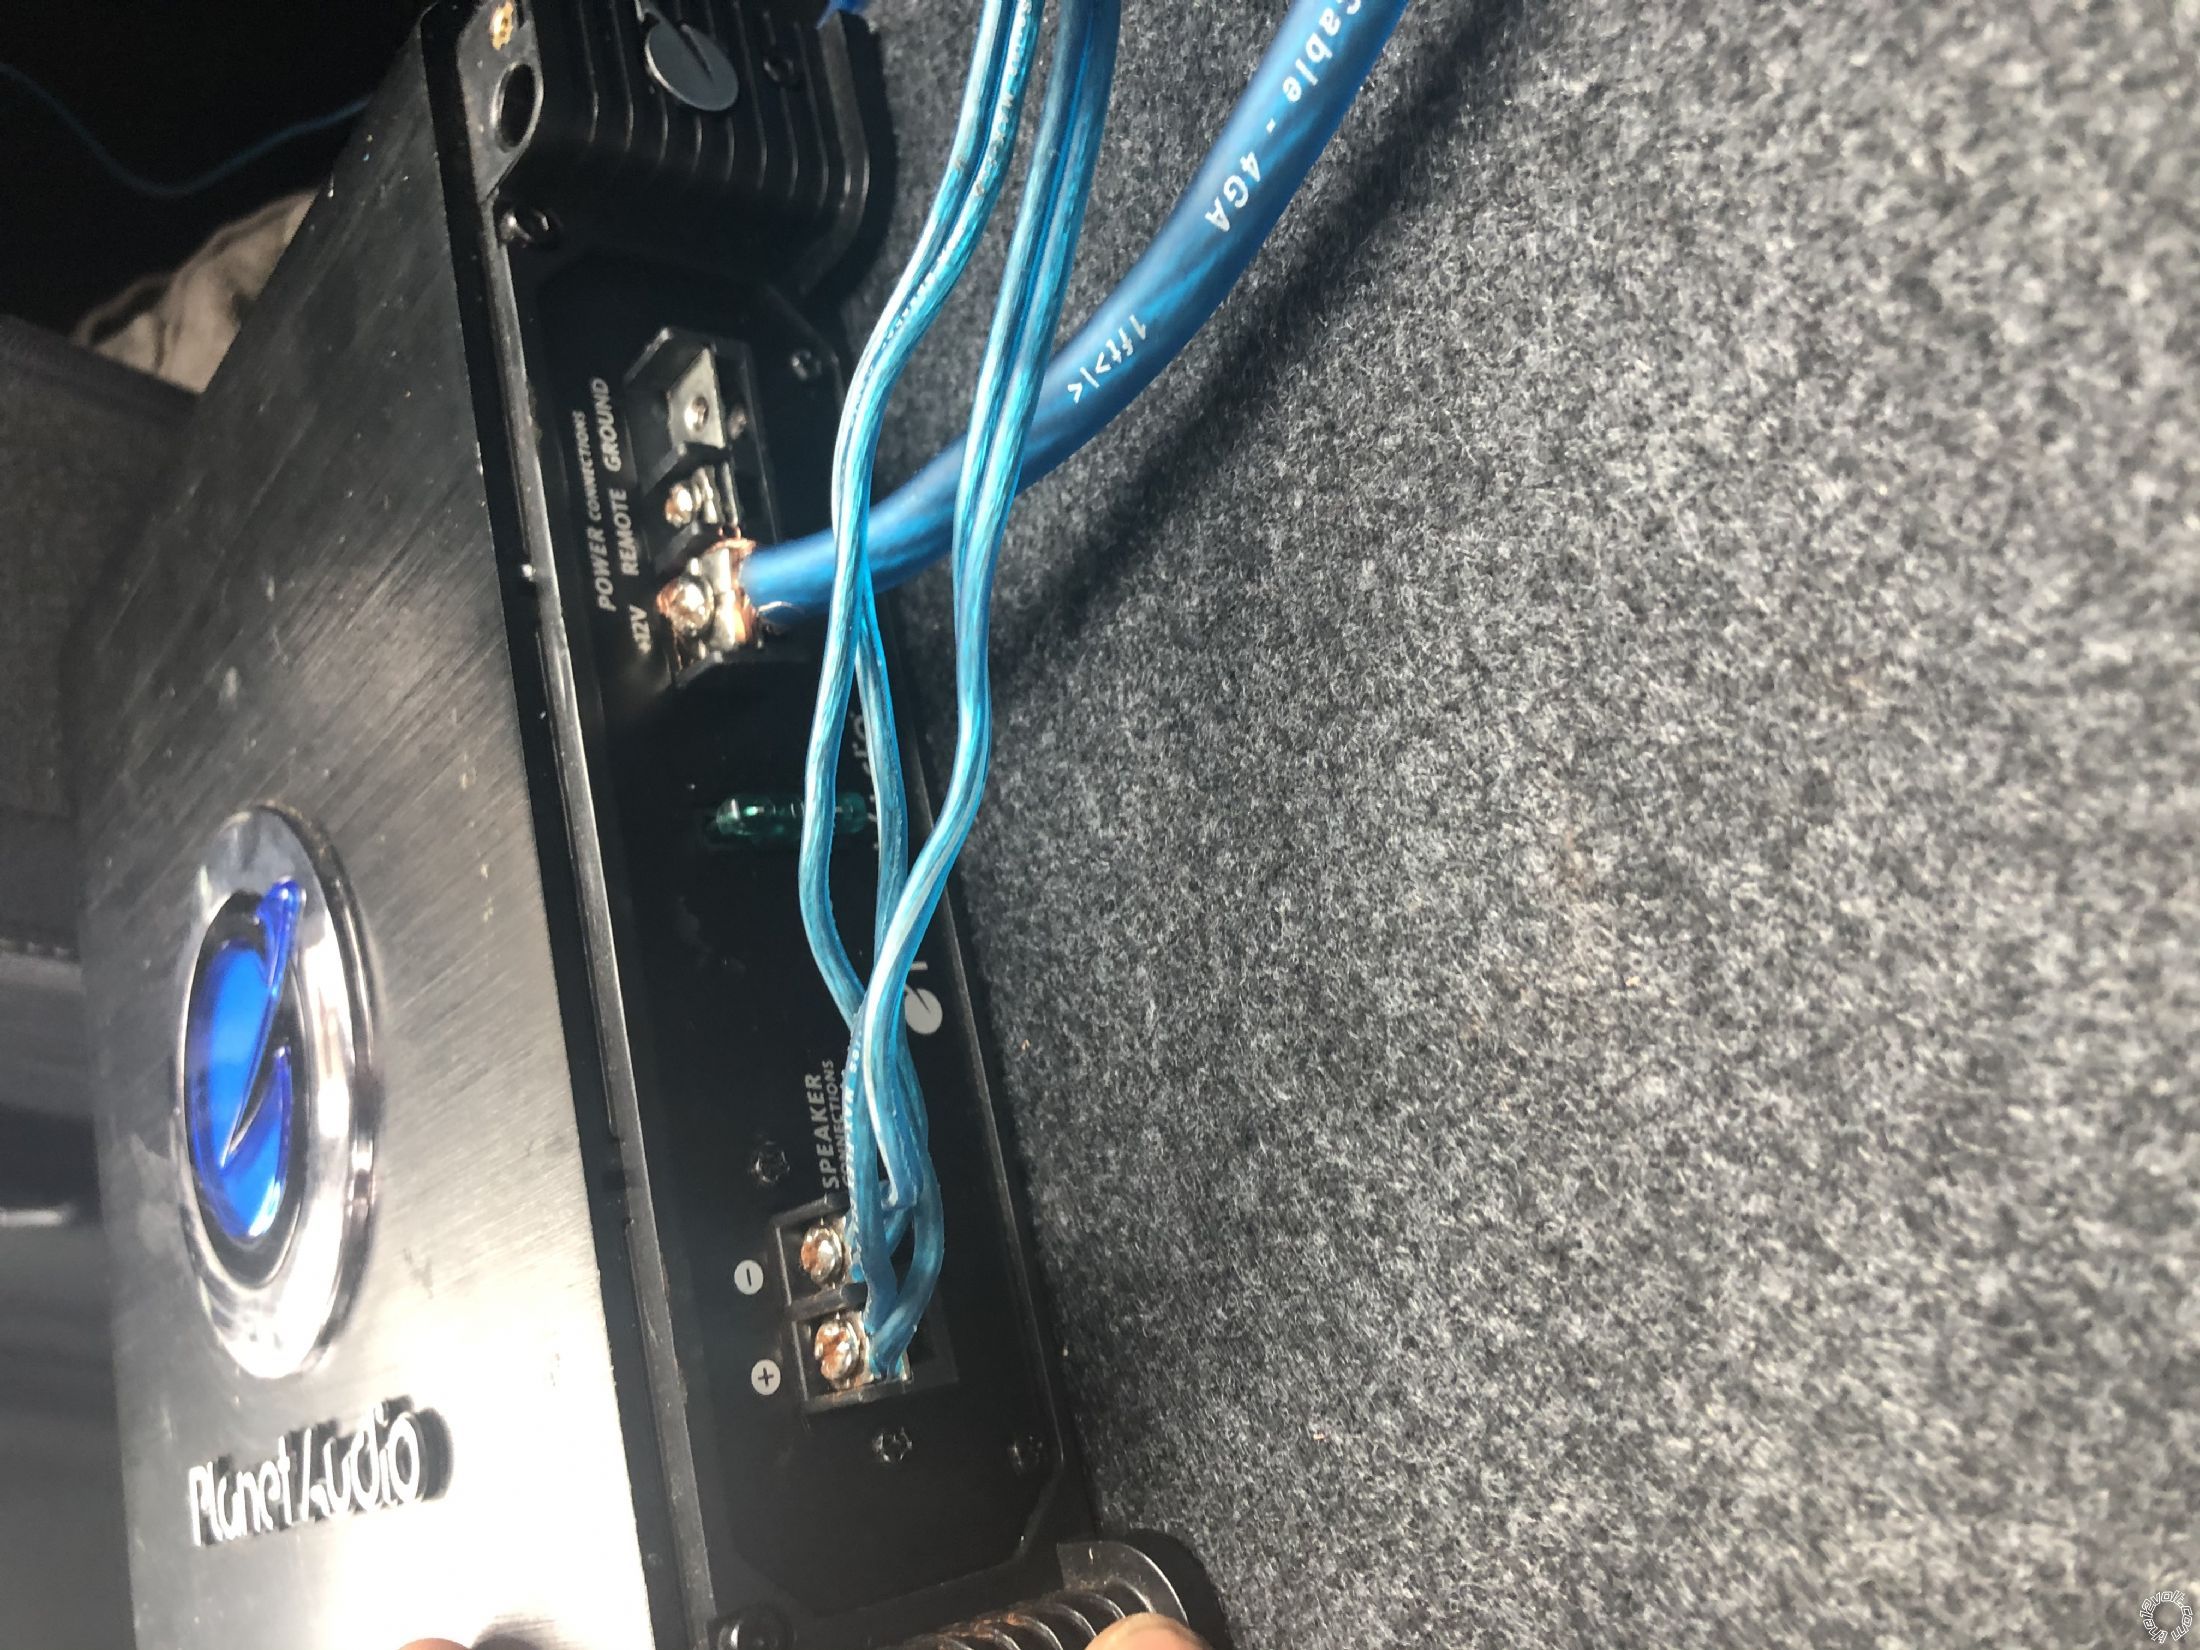 Where to Connect Output Converter for Subs, 2018 Nissan Sentra - Last Post -- posted image.